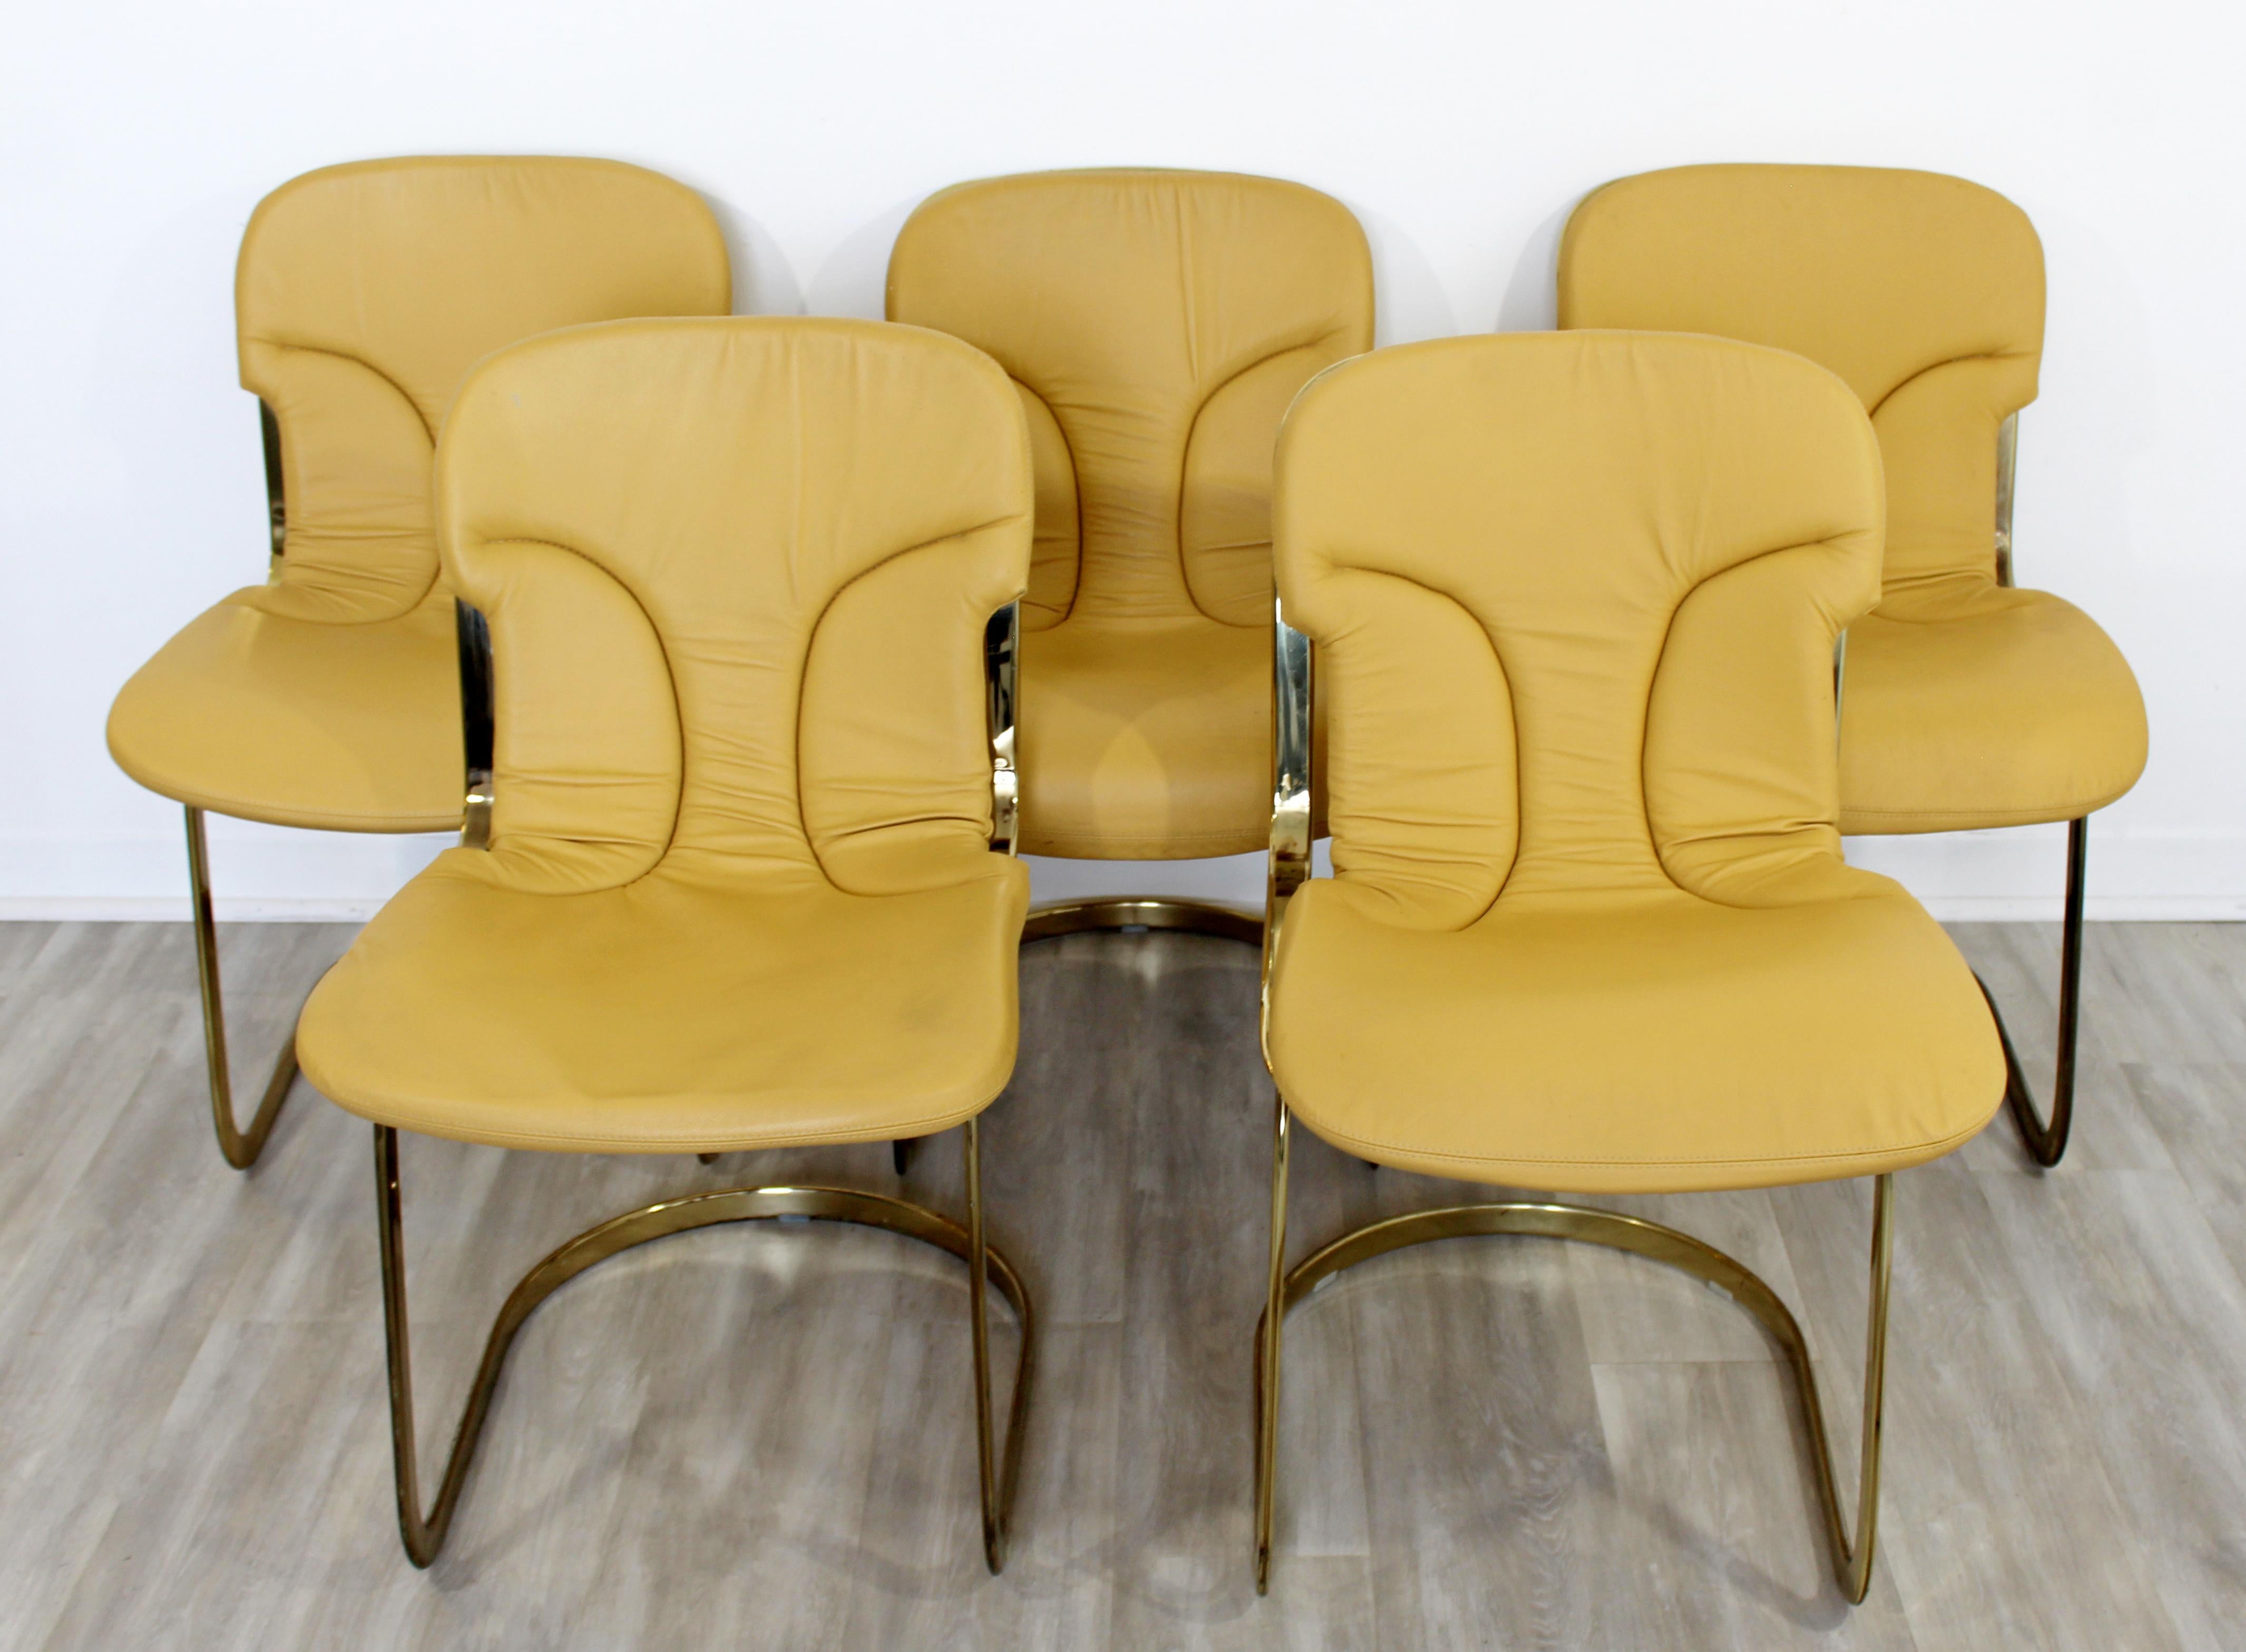 For your consideration is an utterly fabulous set of five, cantilevered brass side dining chairs, by Willy Rizzo for Cidue, made in Italy, circa 1970s. In good vintage condition, with a patina to match its age. The dimensions are 18.5